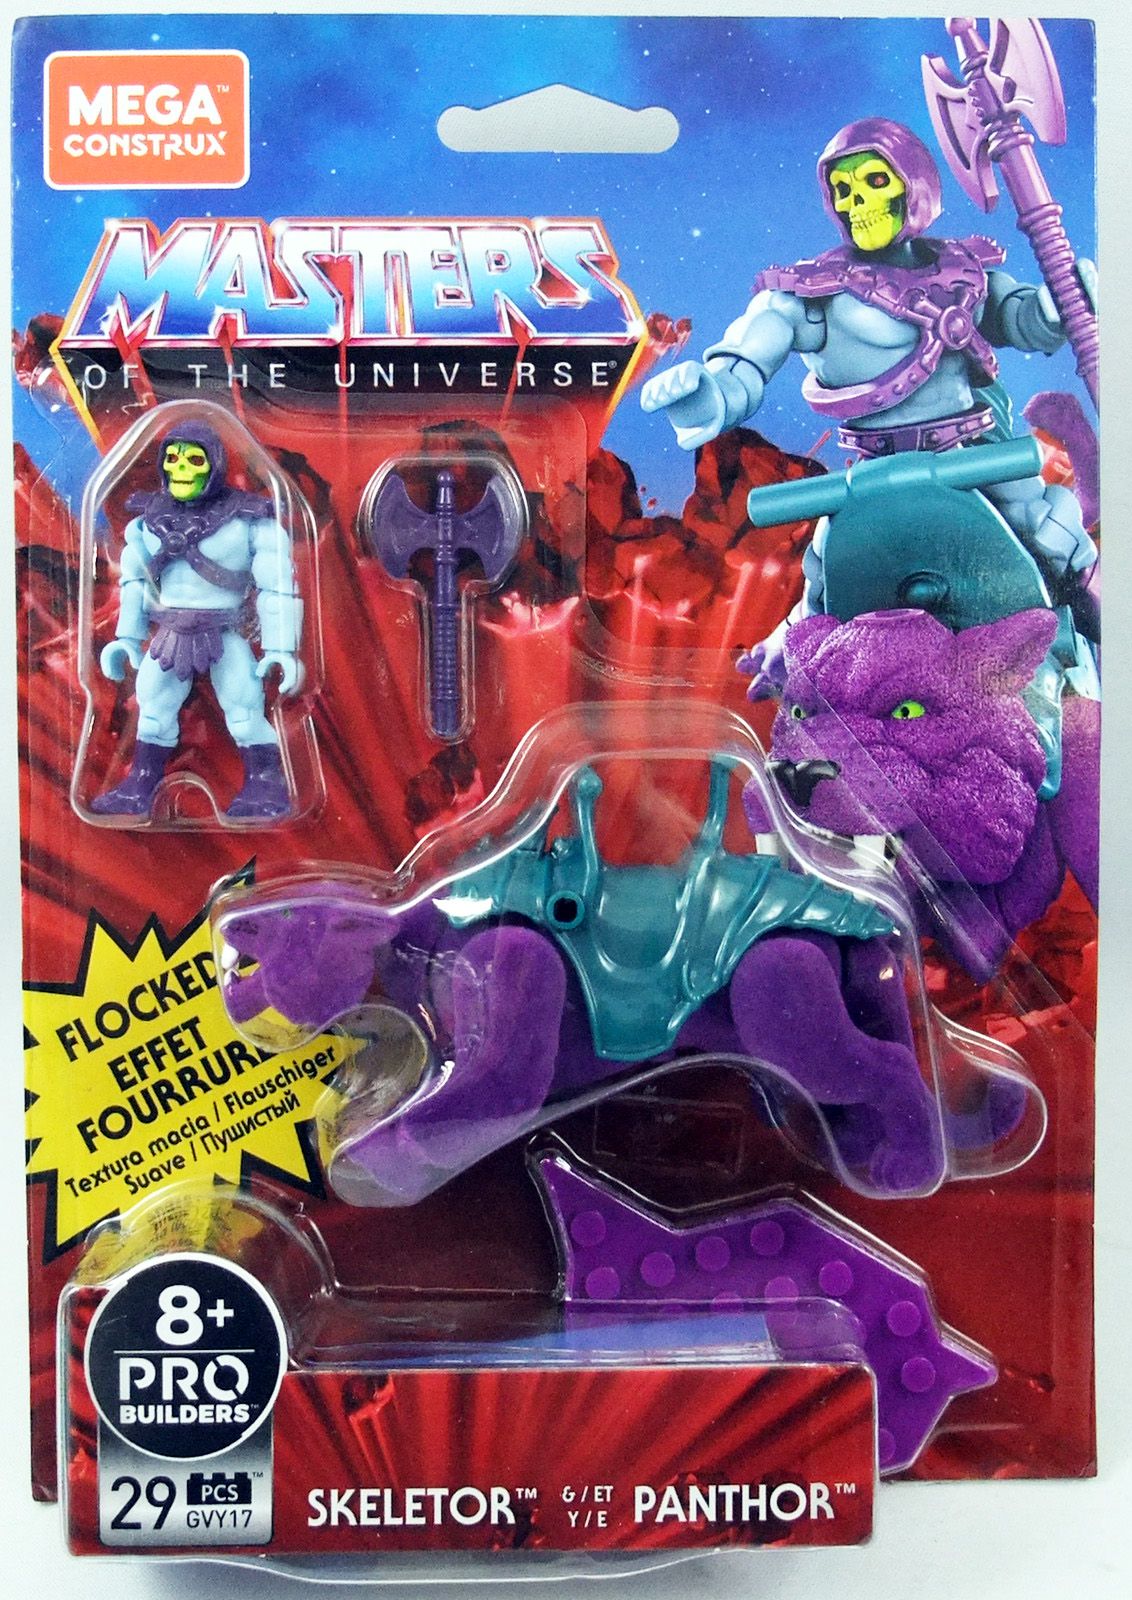 Mega Construx Pro Builders Masters of the Universe Skeletor New in stock 